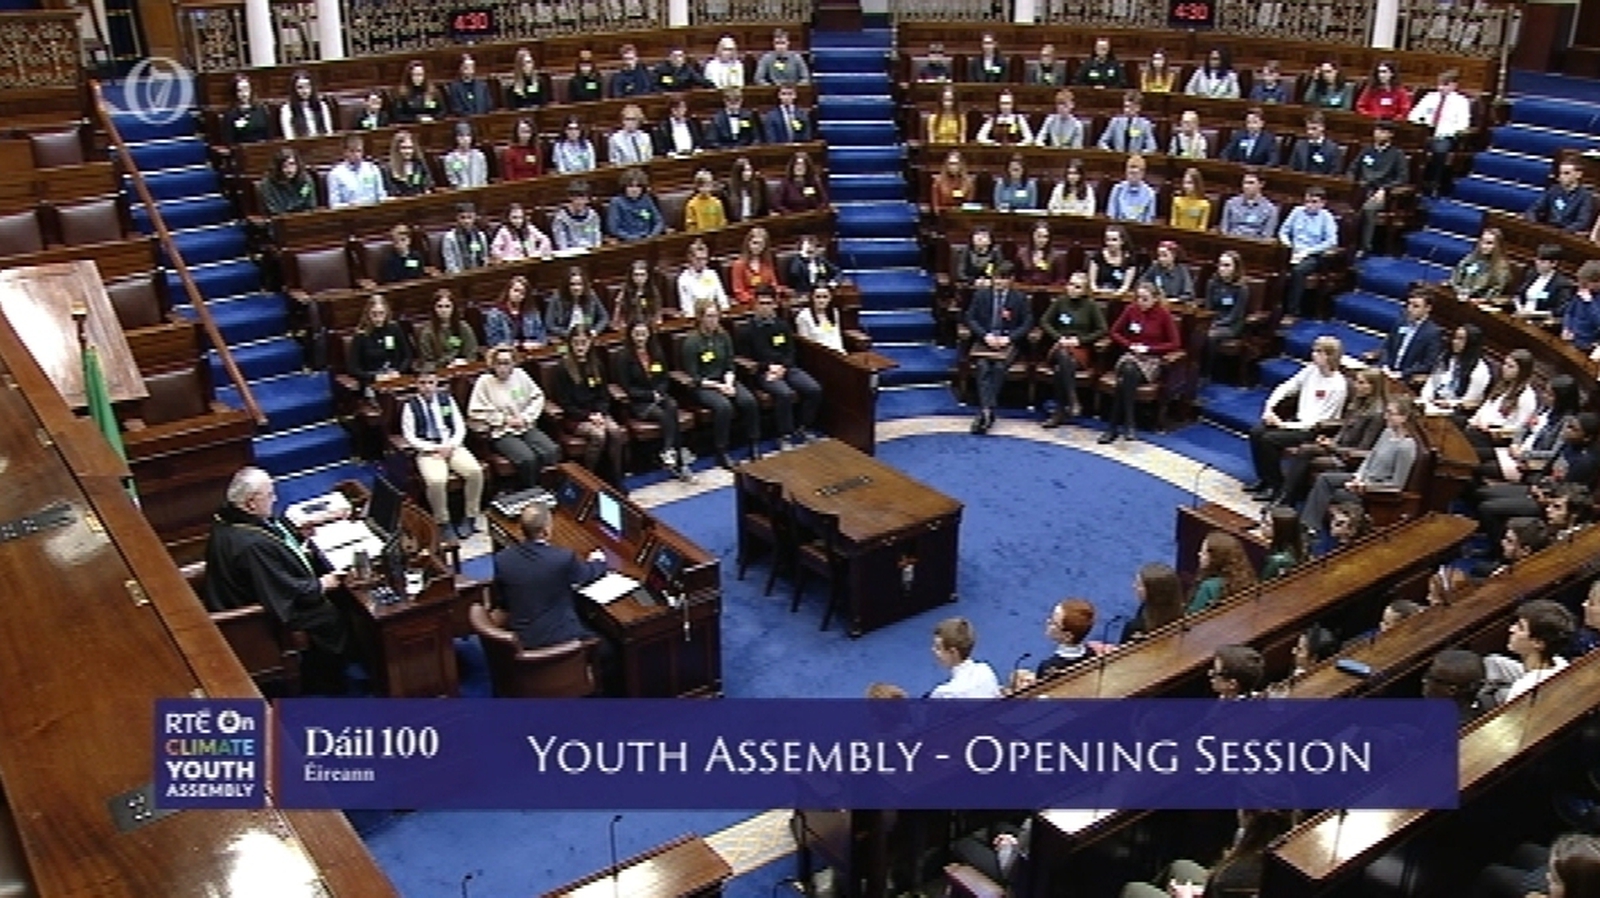 Youth Assembly on climate change takes place in Dáil - RTE.ie